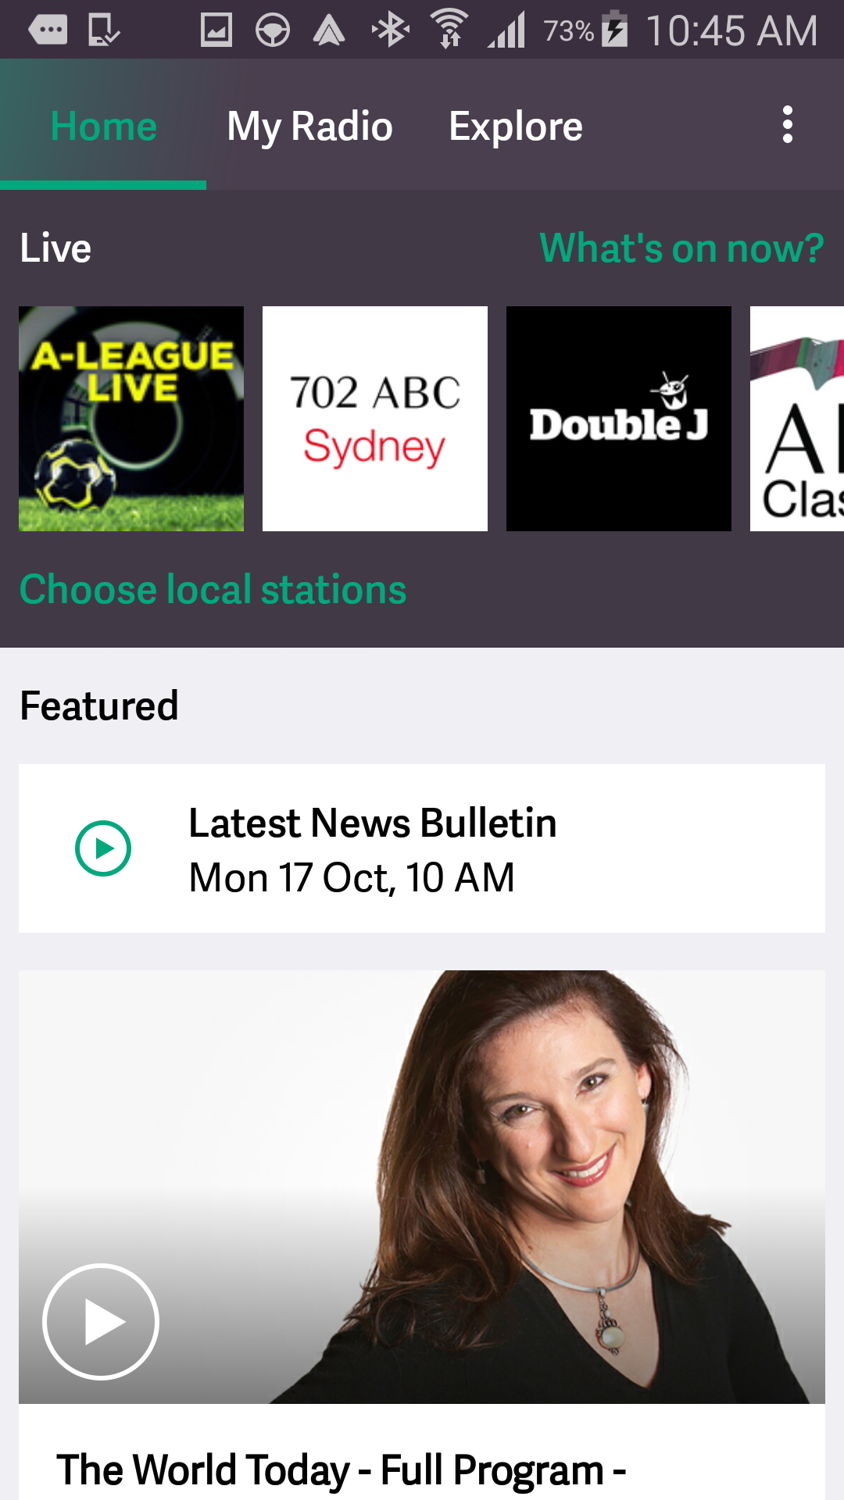 Connected car ready - ABC Radio App users can now access hourly news bulletins on demand